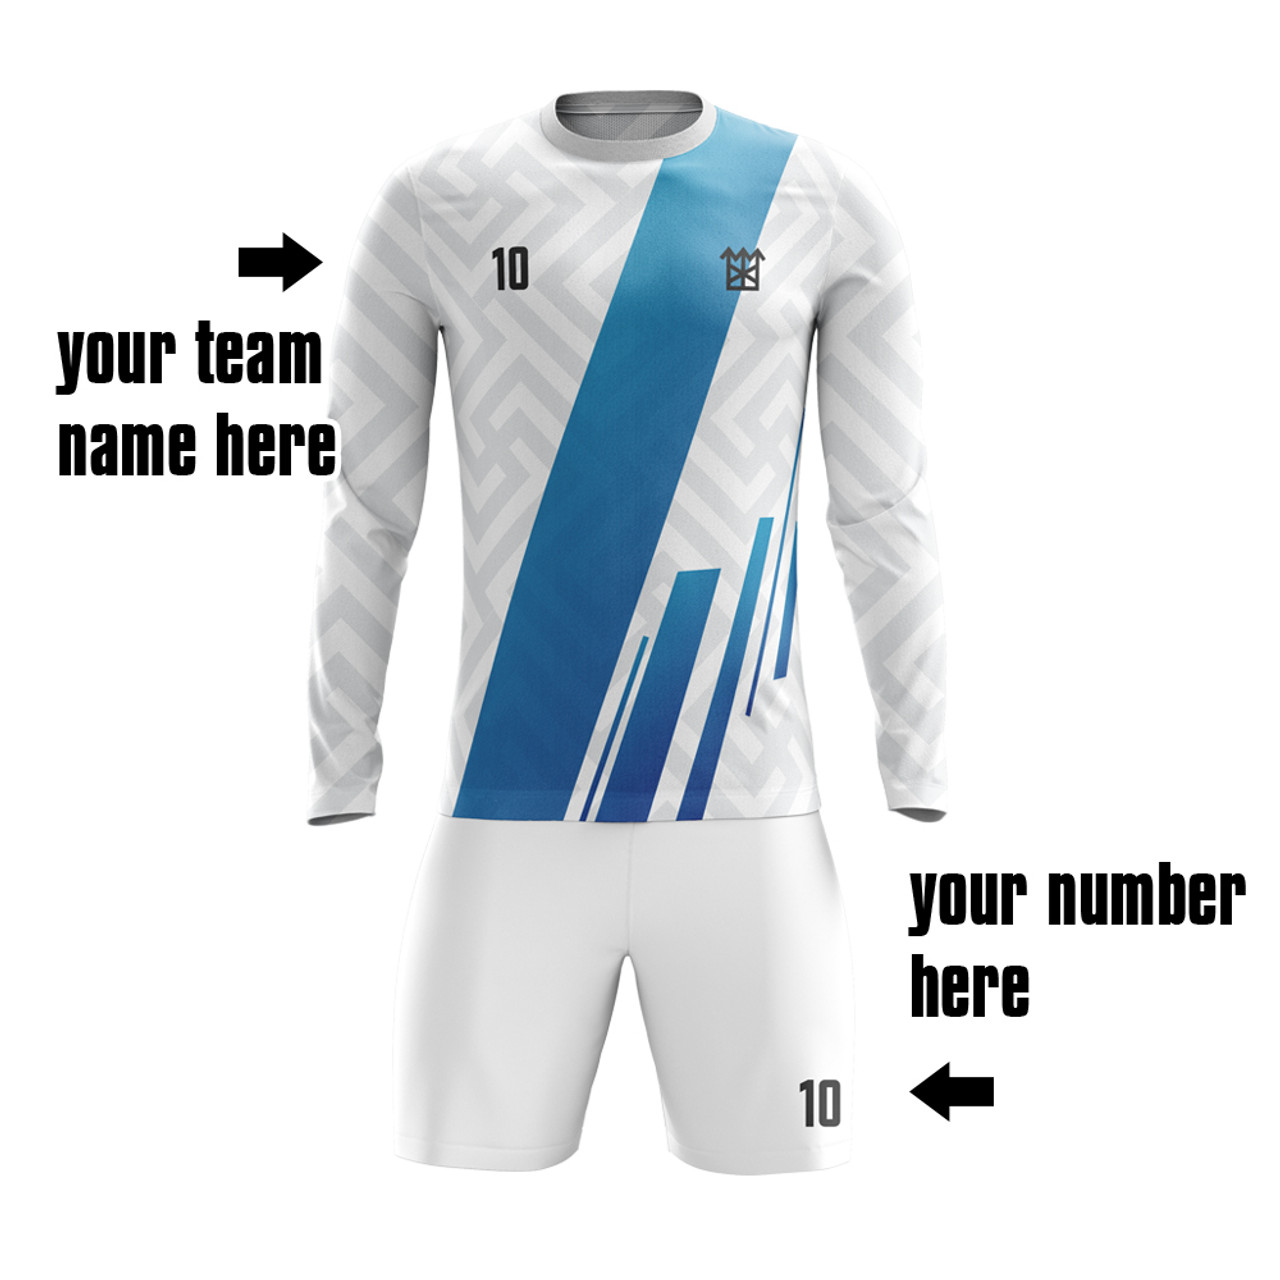 Design 43/White and Silver Soccer Kit  Soccer kits, Clothes design, Jersey  design